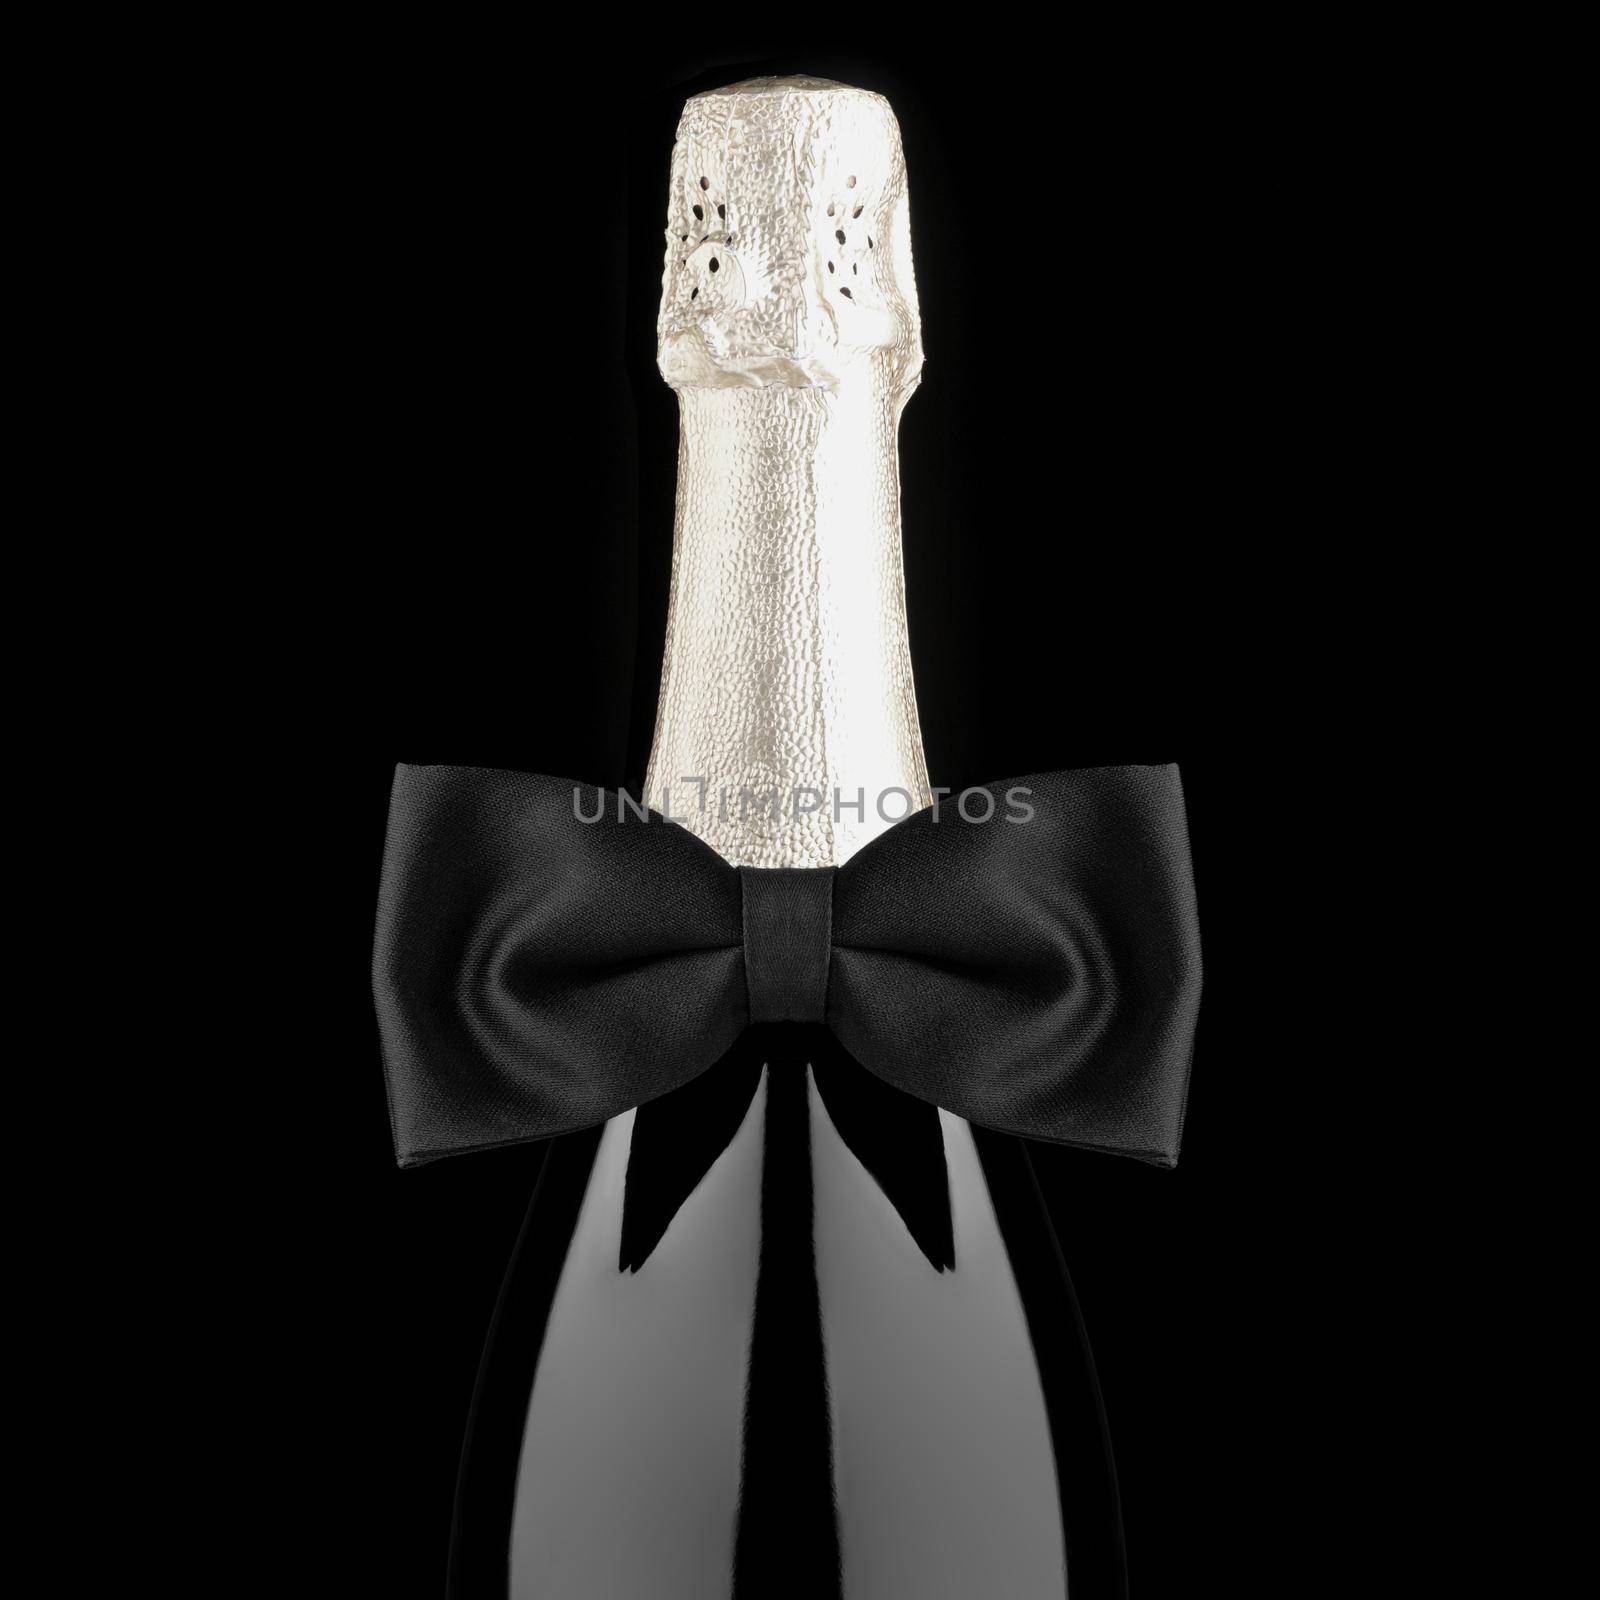 Champagne Bottle with Bow Tie Closeup by sCukrov